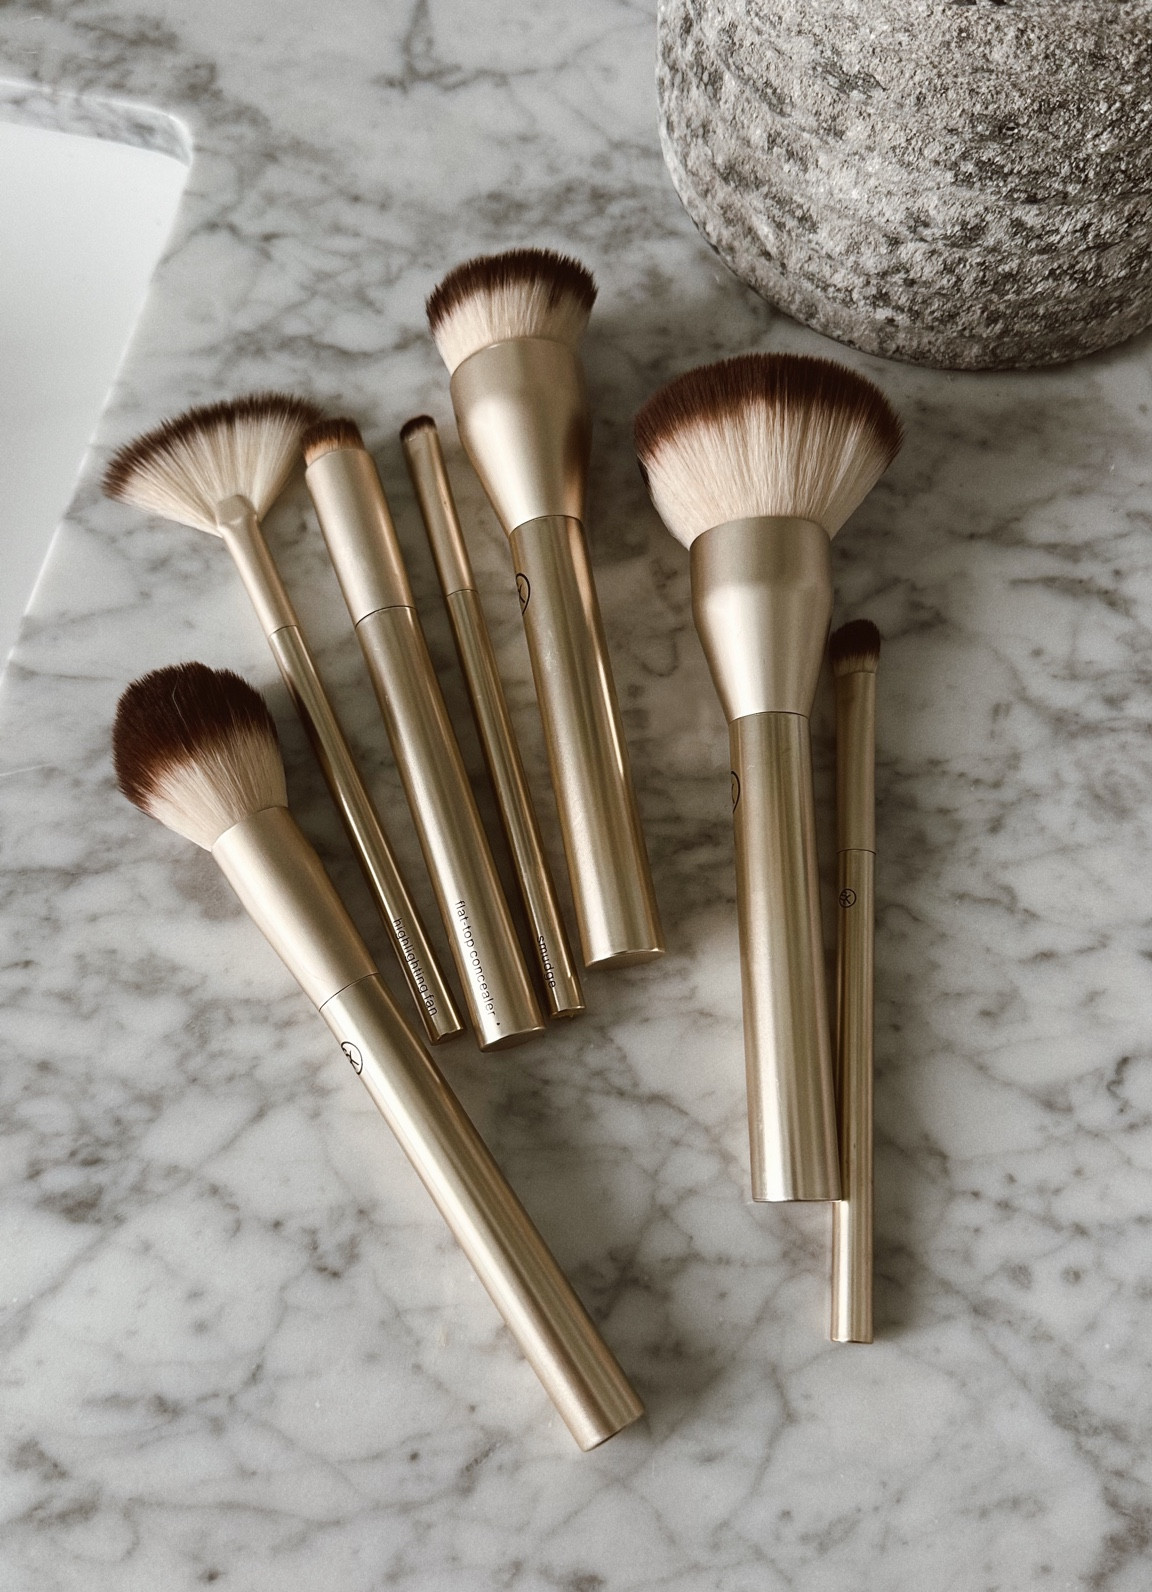 Sonia Kashuk™ Essential Collection Complete Makeup Brush Set - 10pc : Target